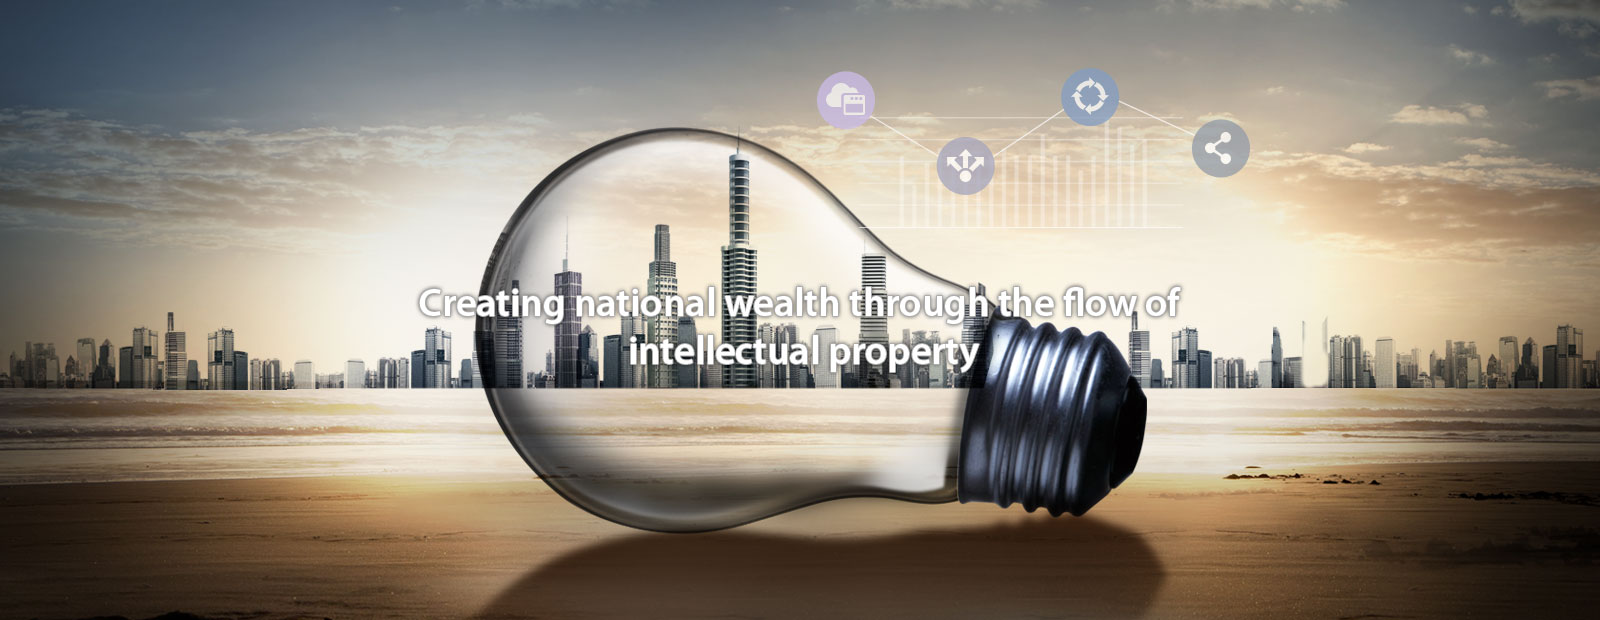 Creating national wealth through the flow of intellectual property